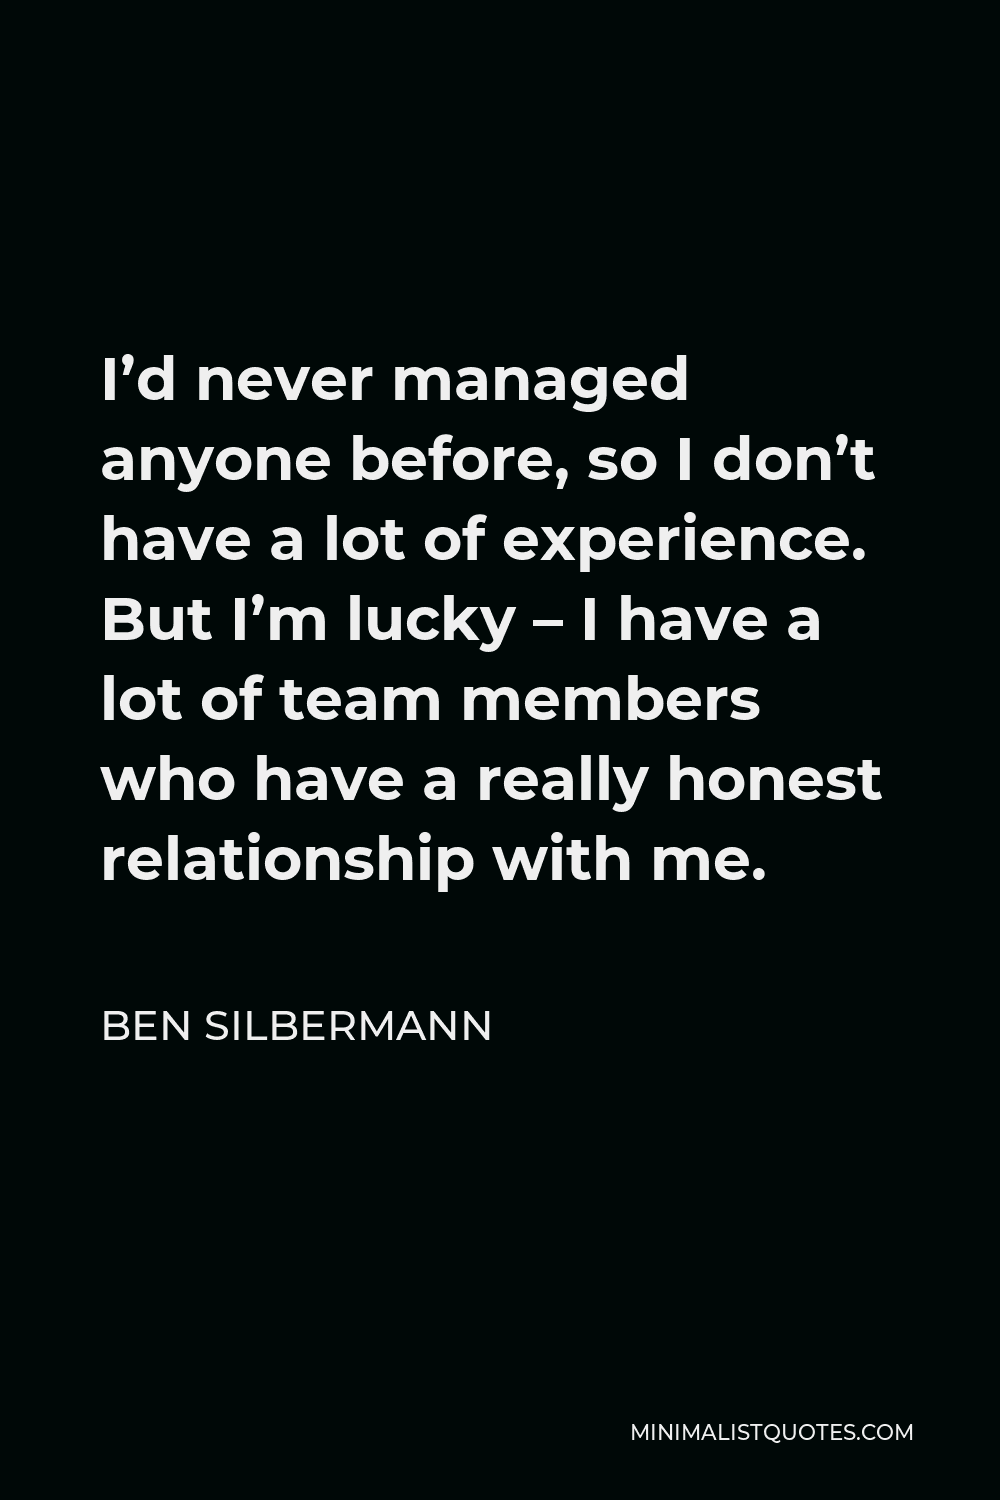 Ben Silbermann Quote - I’d never managed anyone before, so I don’t have a lot of experience. But I’m lucky – I have a lot of team members who have a really honest relationship with me.